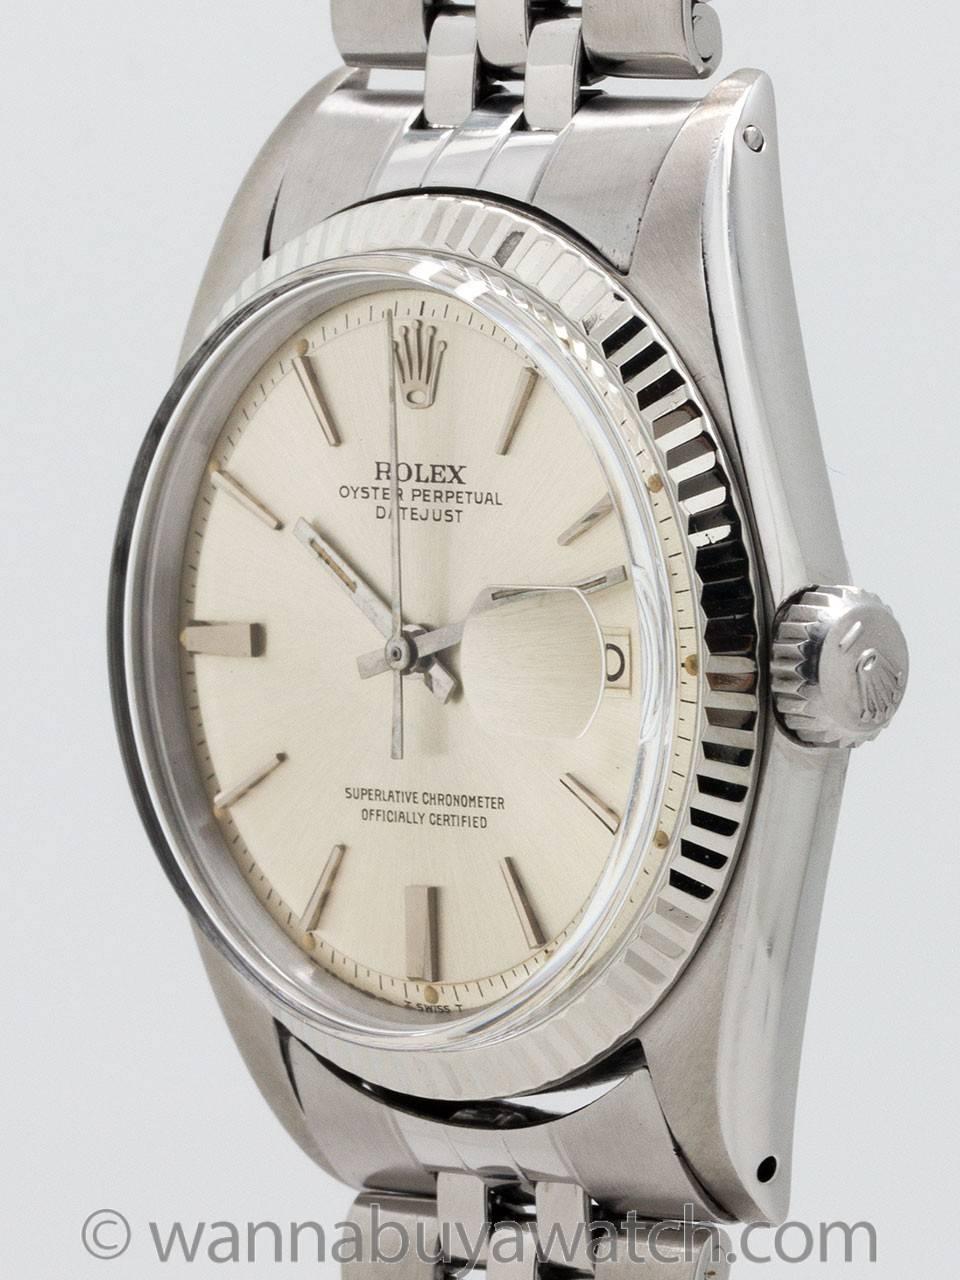 Rolex Stainless Steel Datejust ref 1601 serial number 1.4 million circa 1966. 36mm diameter Oyster case with 14K WG fluted bezel, signed Rolex crown and acrylic crystal. Classic silvered satin pie pan dial with applied indexes, logo and baton hands.